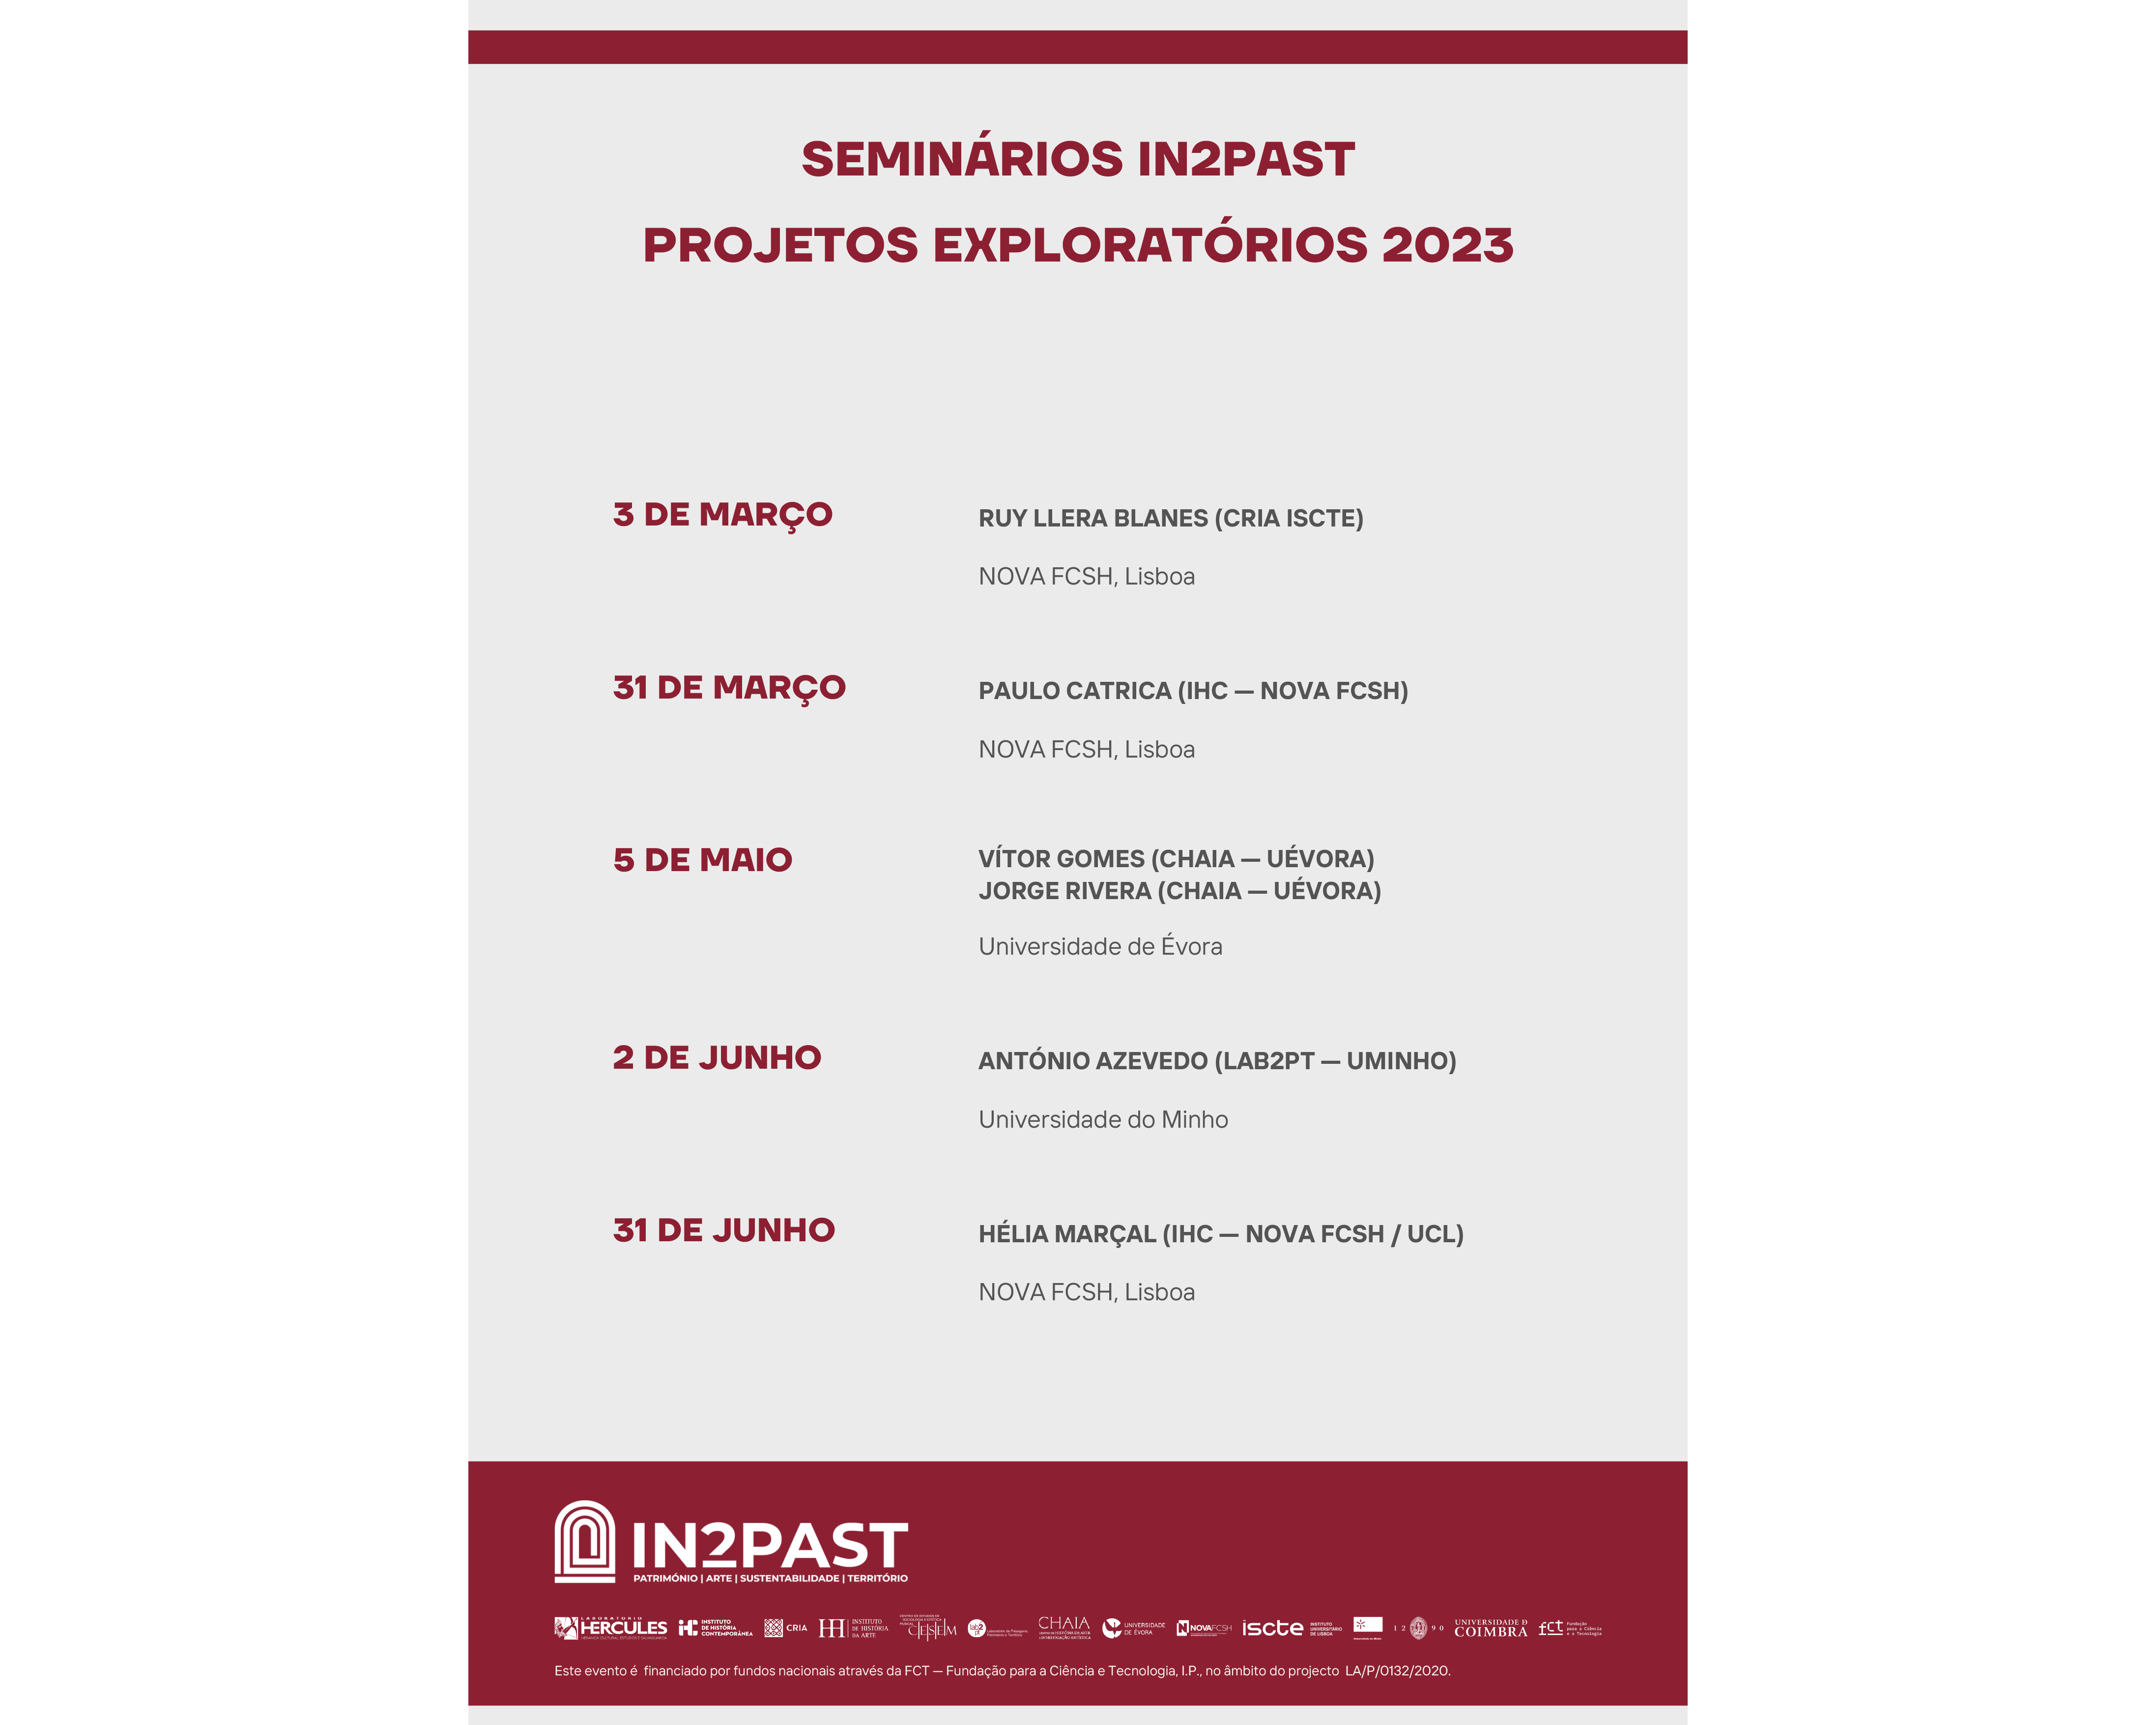 IN2PAST Seminars - Exploratory Projects 2023 image